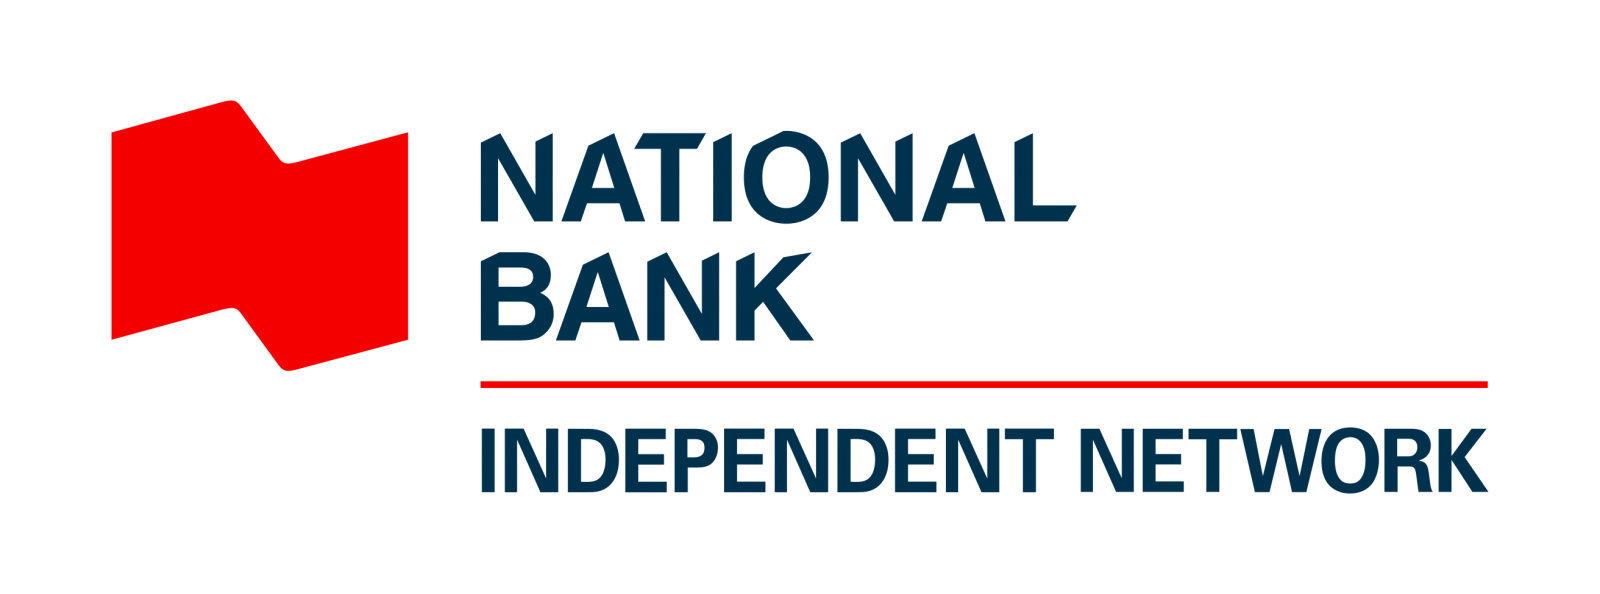 national bank independent network_RGB